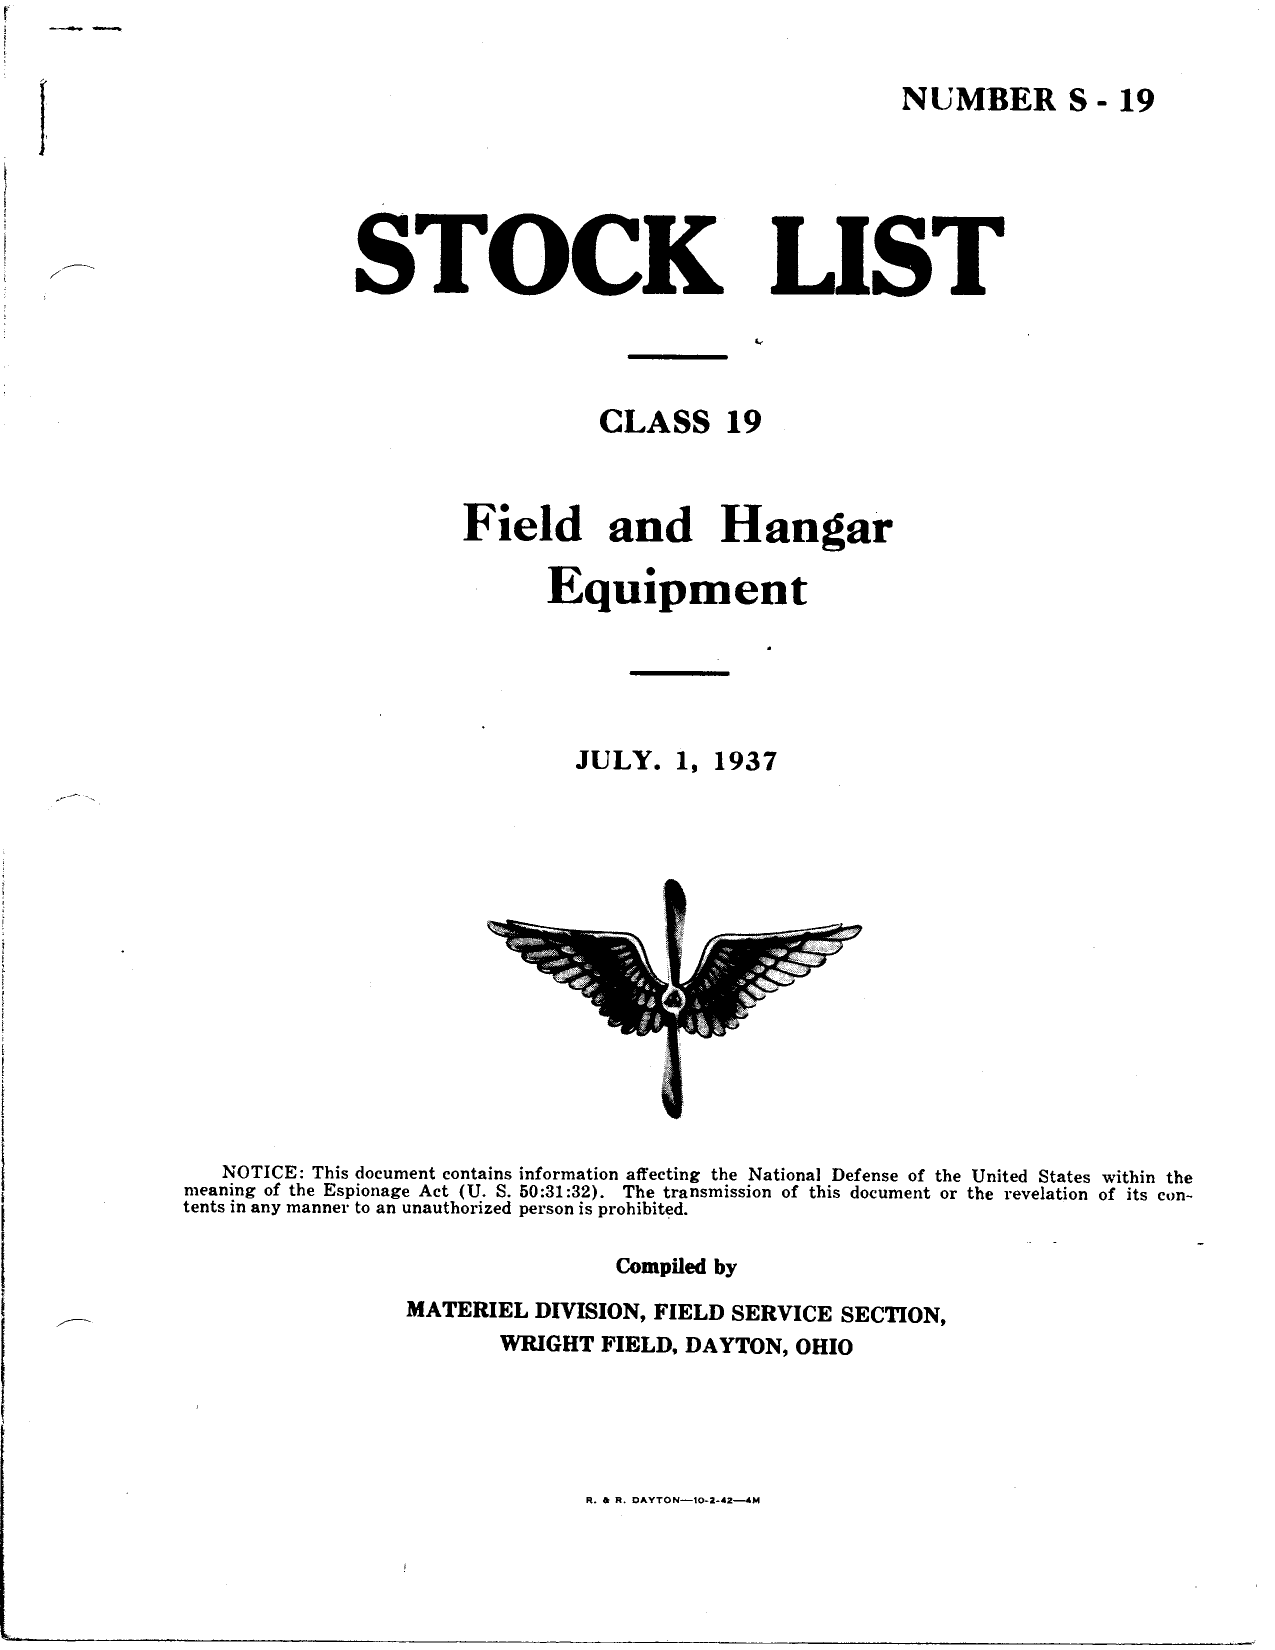 Sample page 1 from AirCorps Library document: Stock List for Field and Hanger Equipment